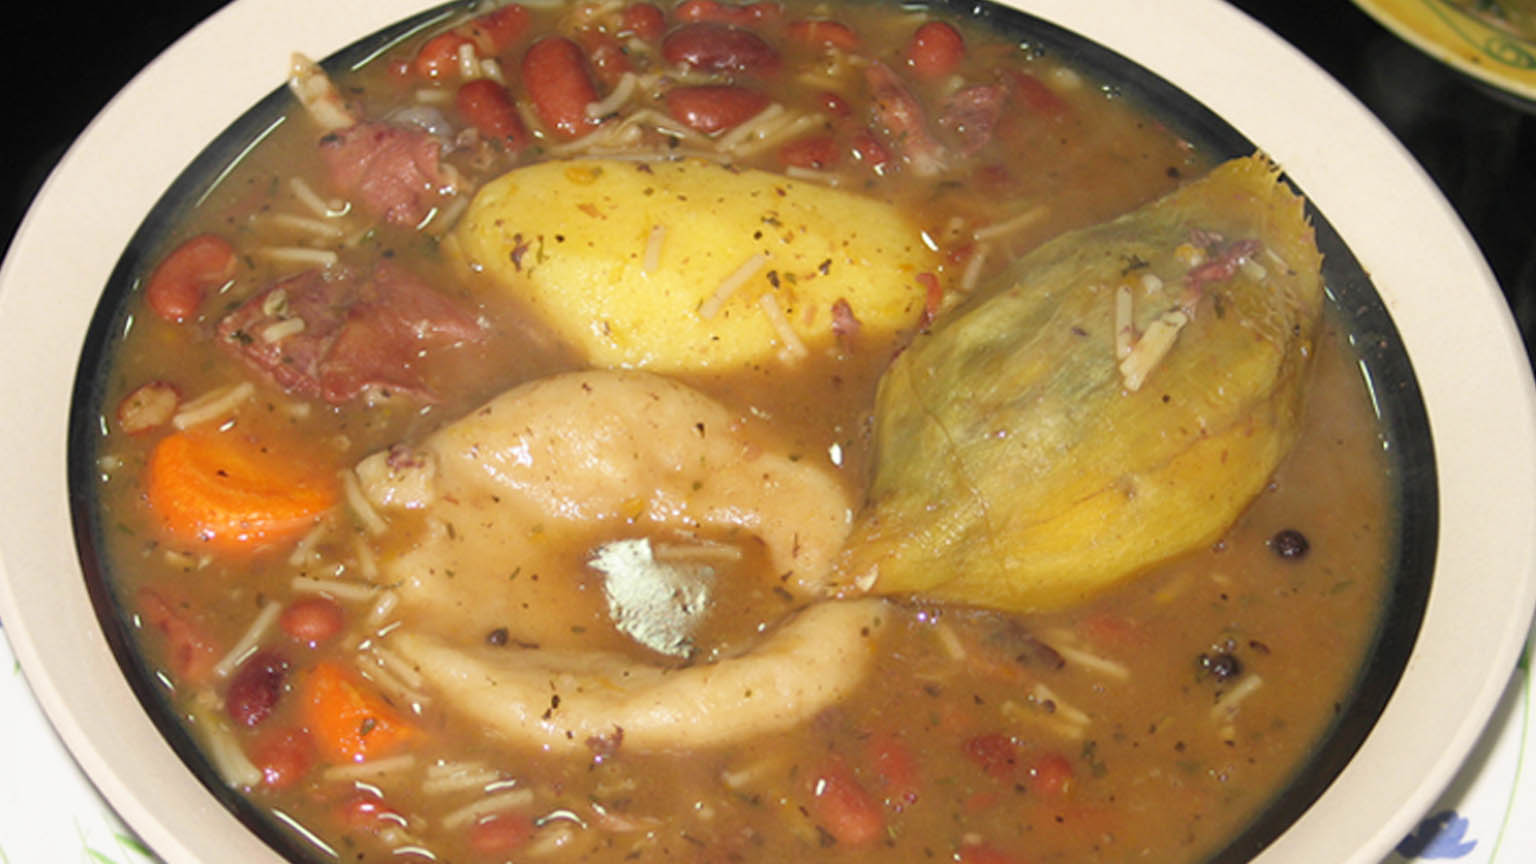 Red Peas Soup or Kidney Beans Soup